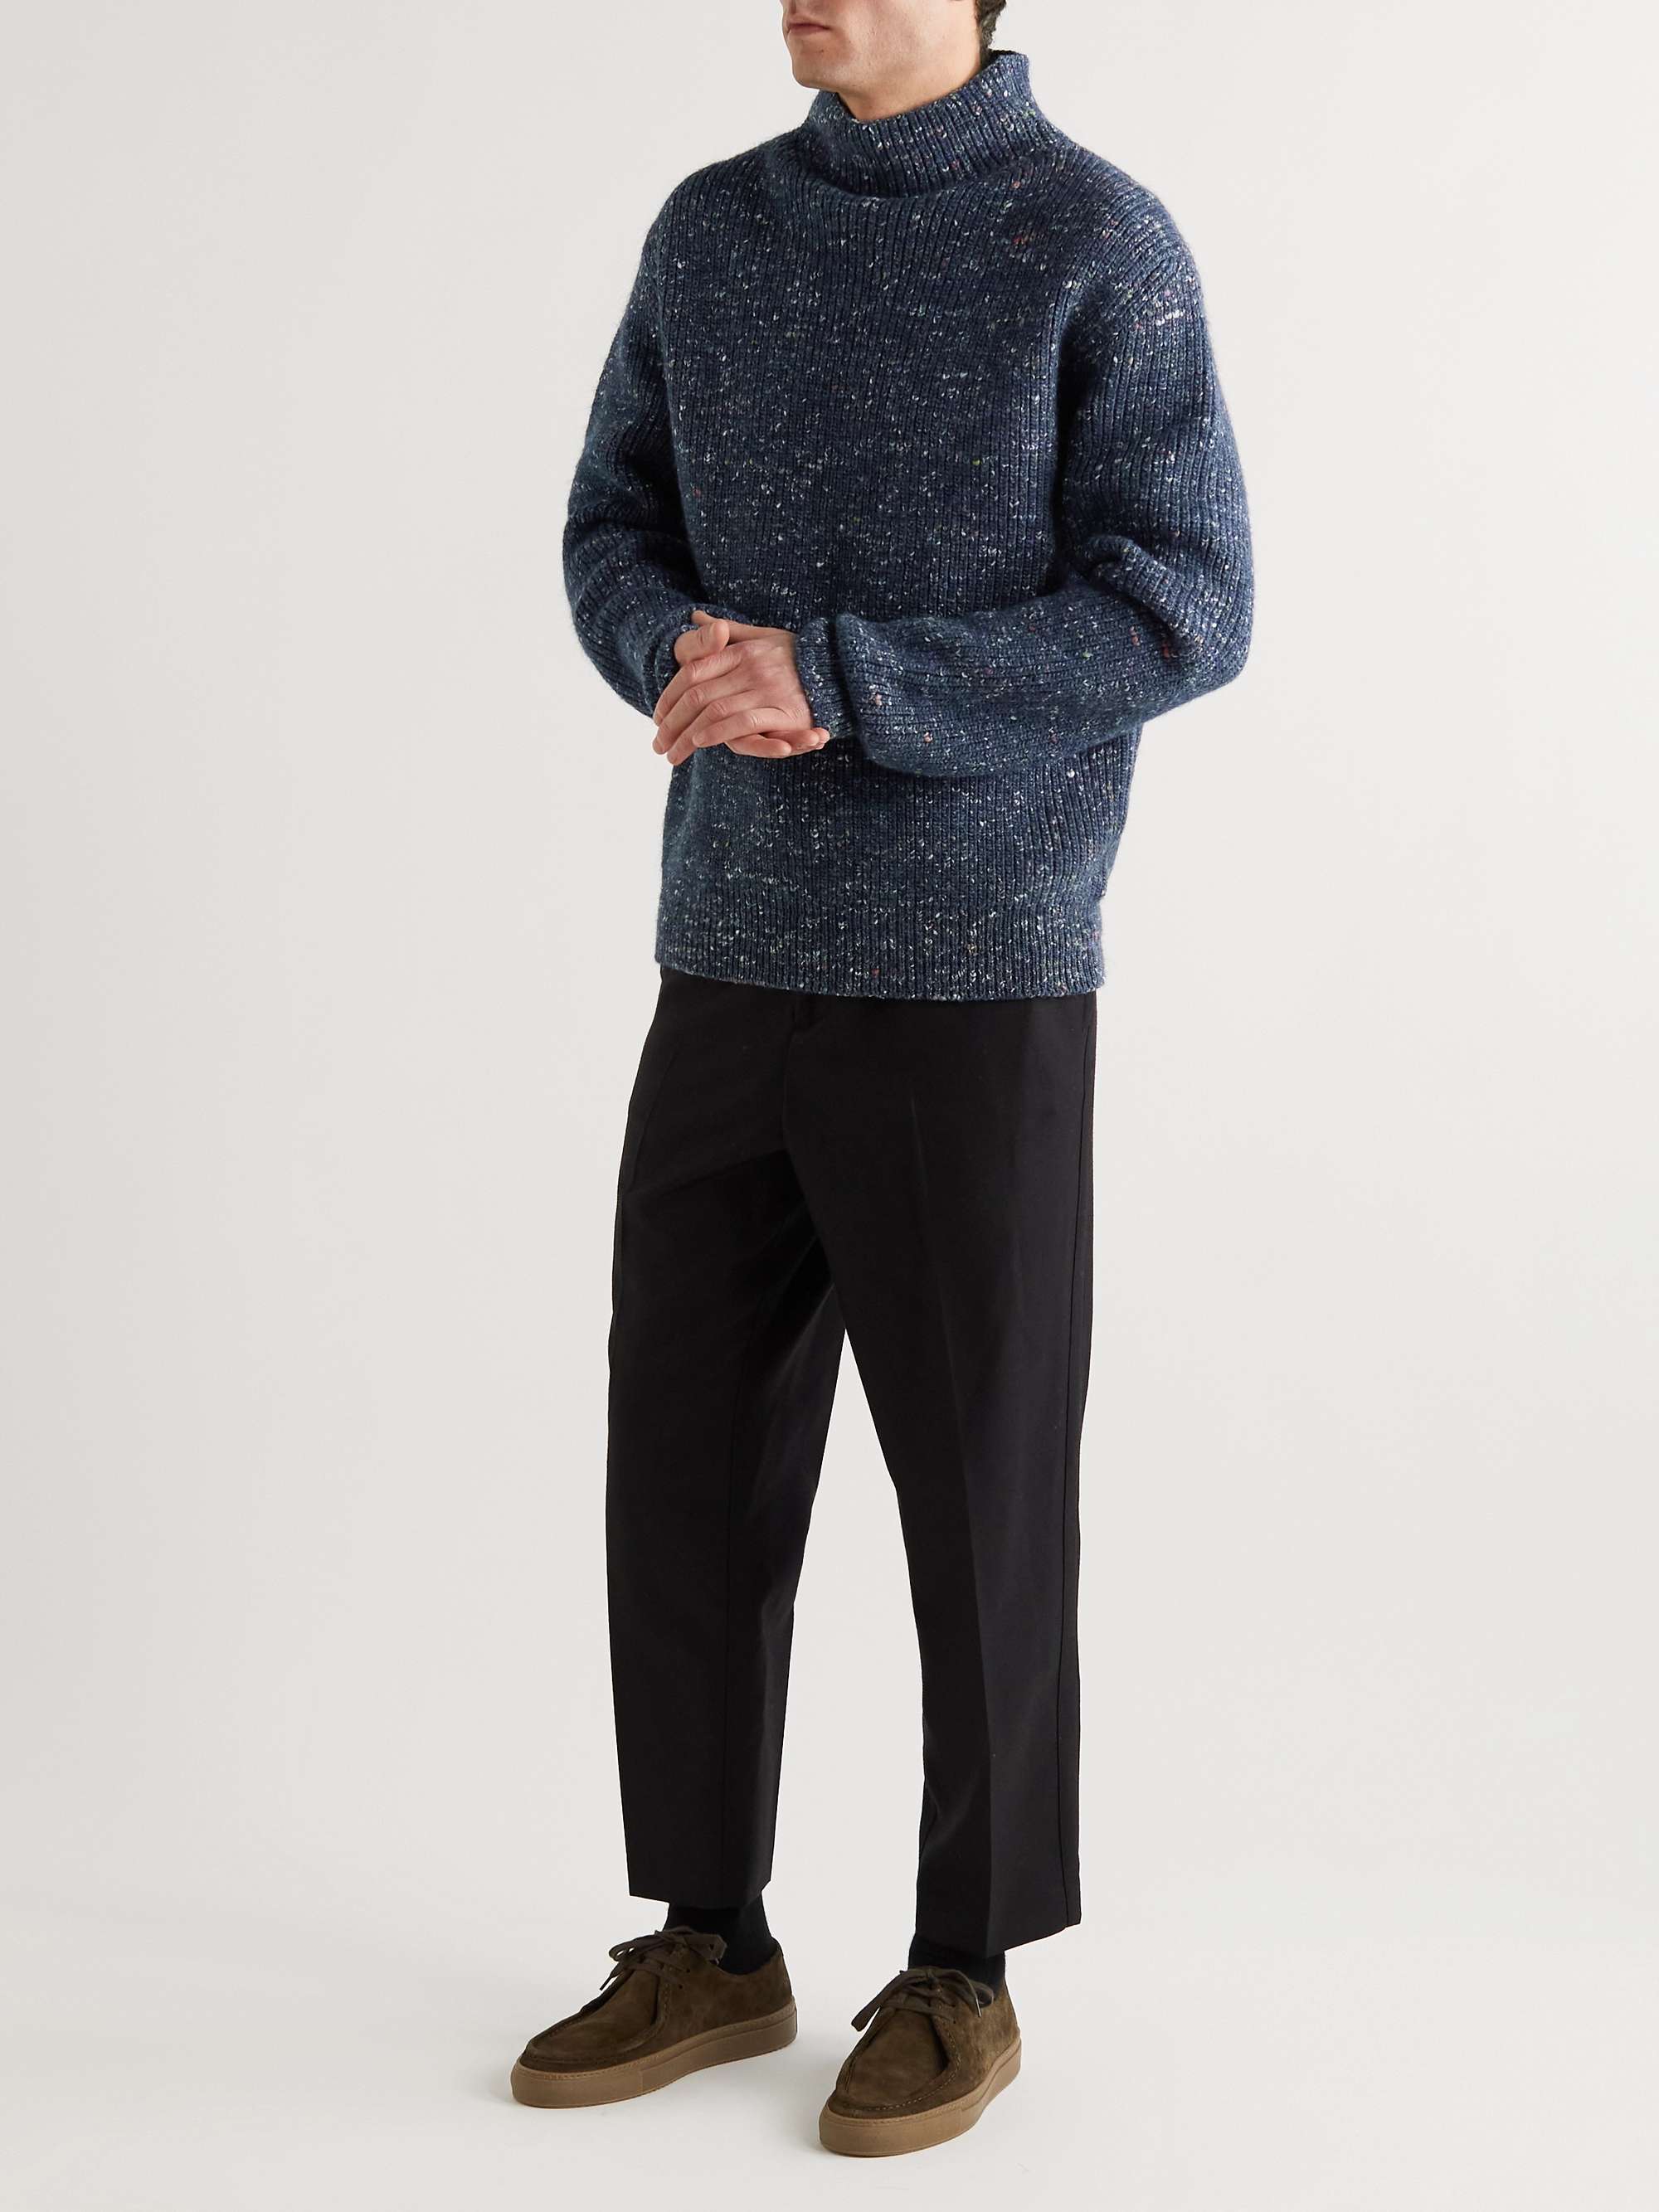 MR P. Ribbed Donegal Merino Wool-Blend Sweater